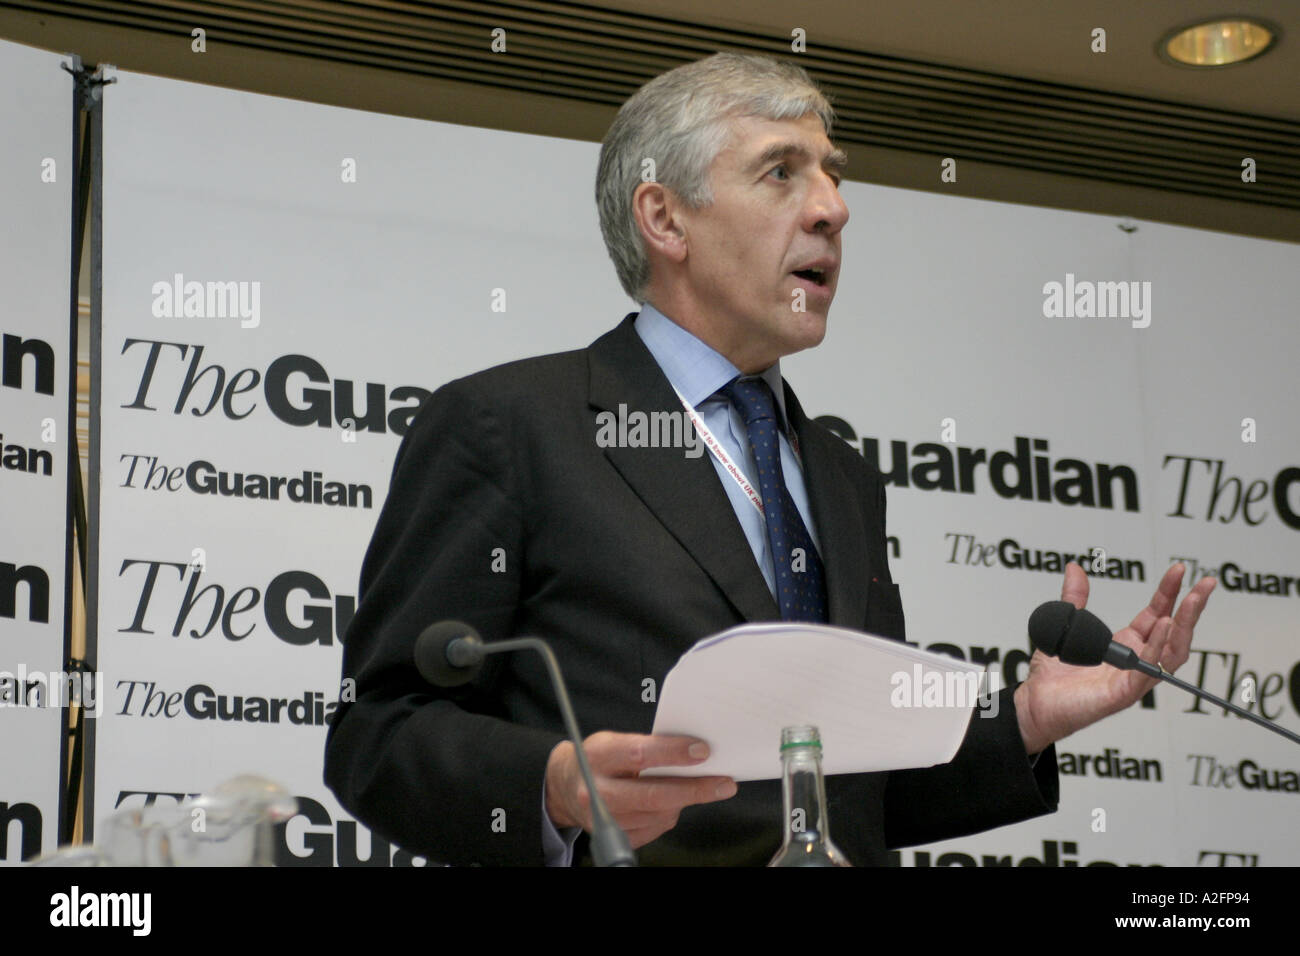 jack straw mp foreign secretary speech conf 2004 labour party guardian nwpr fringe meeting england uk Stock Photo